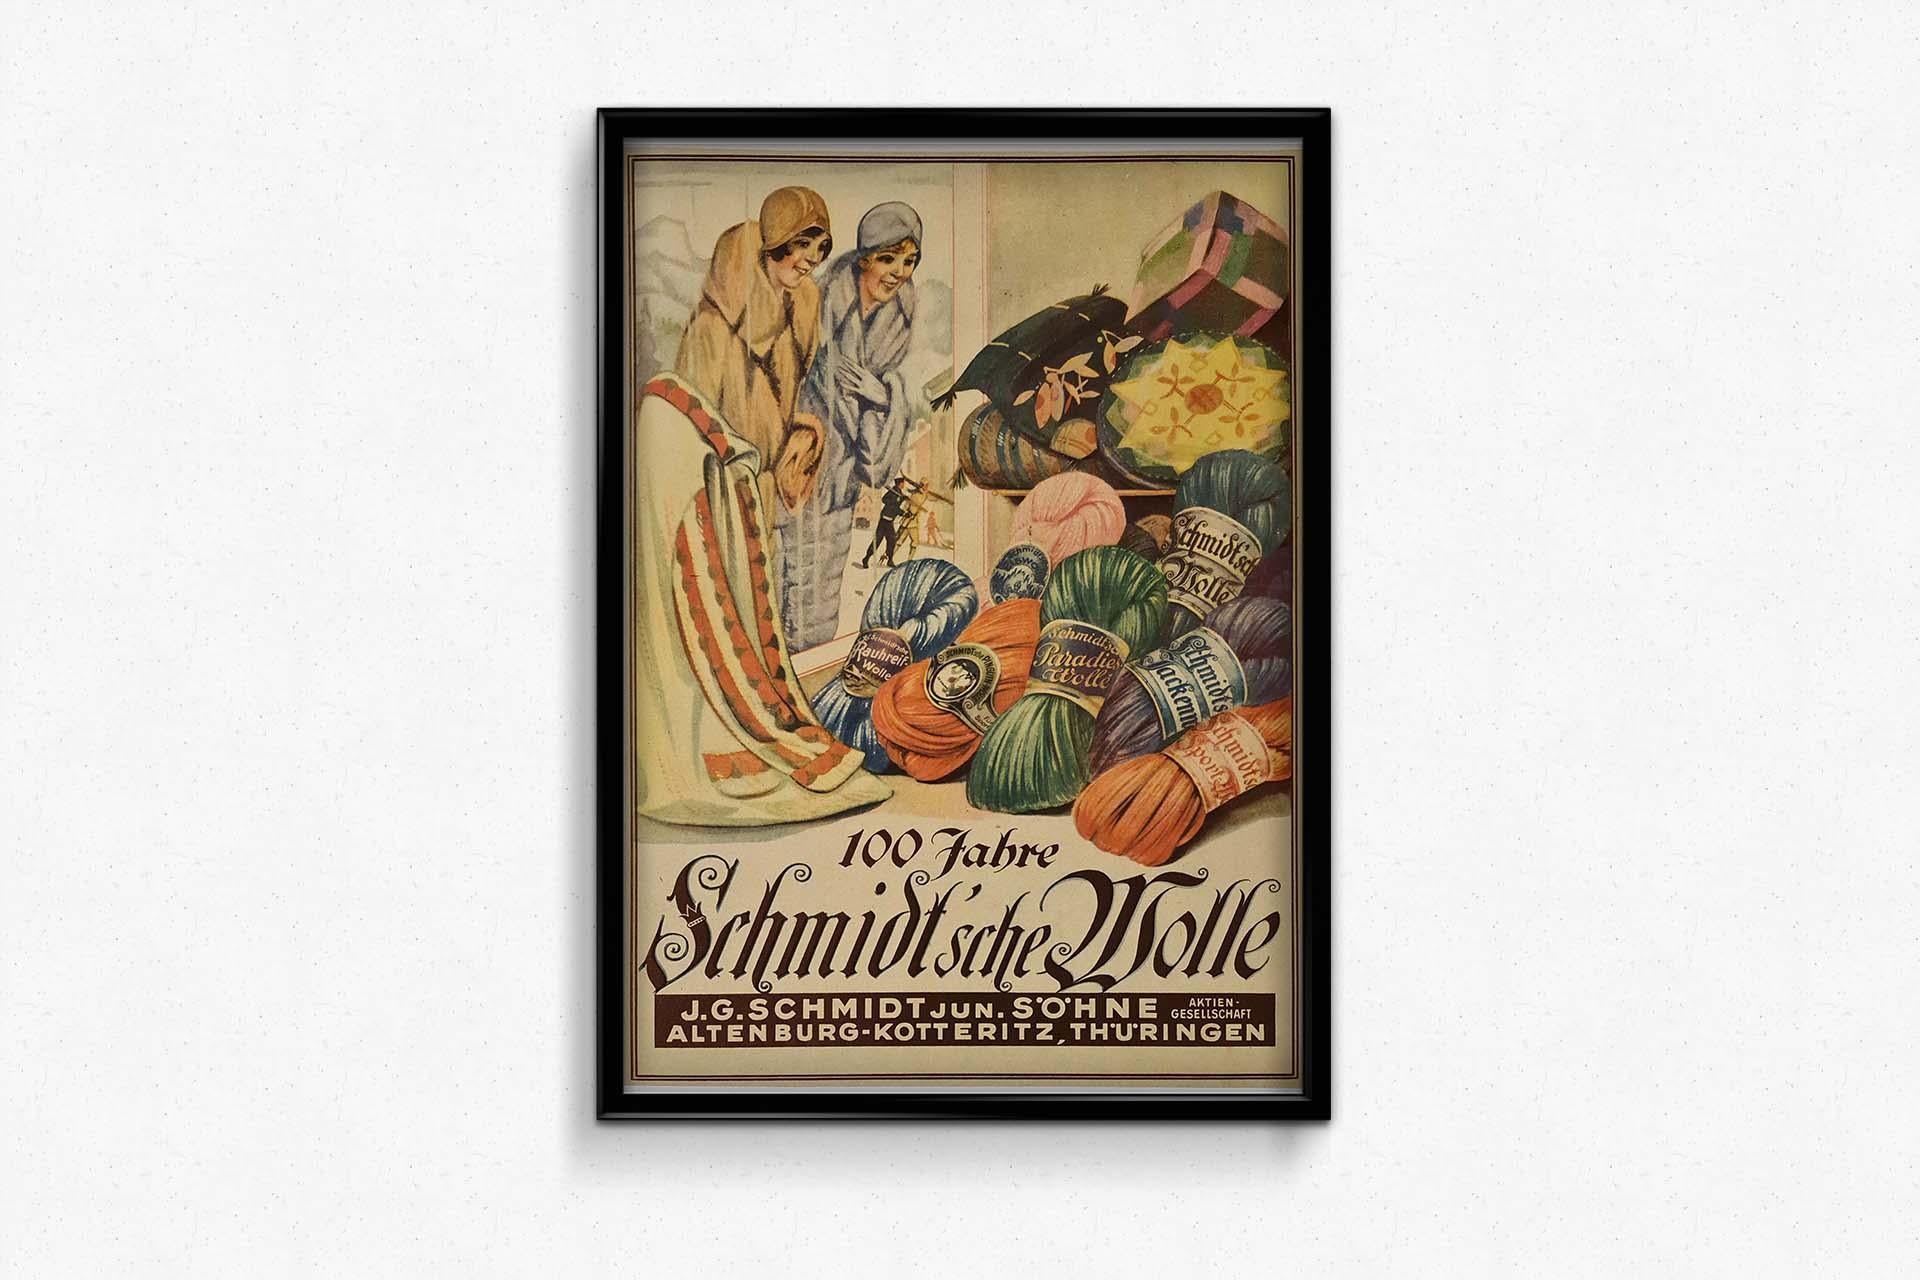 1930s Art Deco style poster to celebrate 100 years of Schmidt wool - German For Sale 2